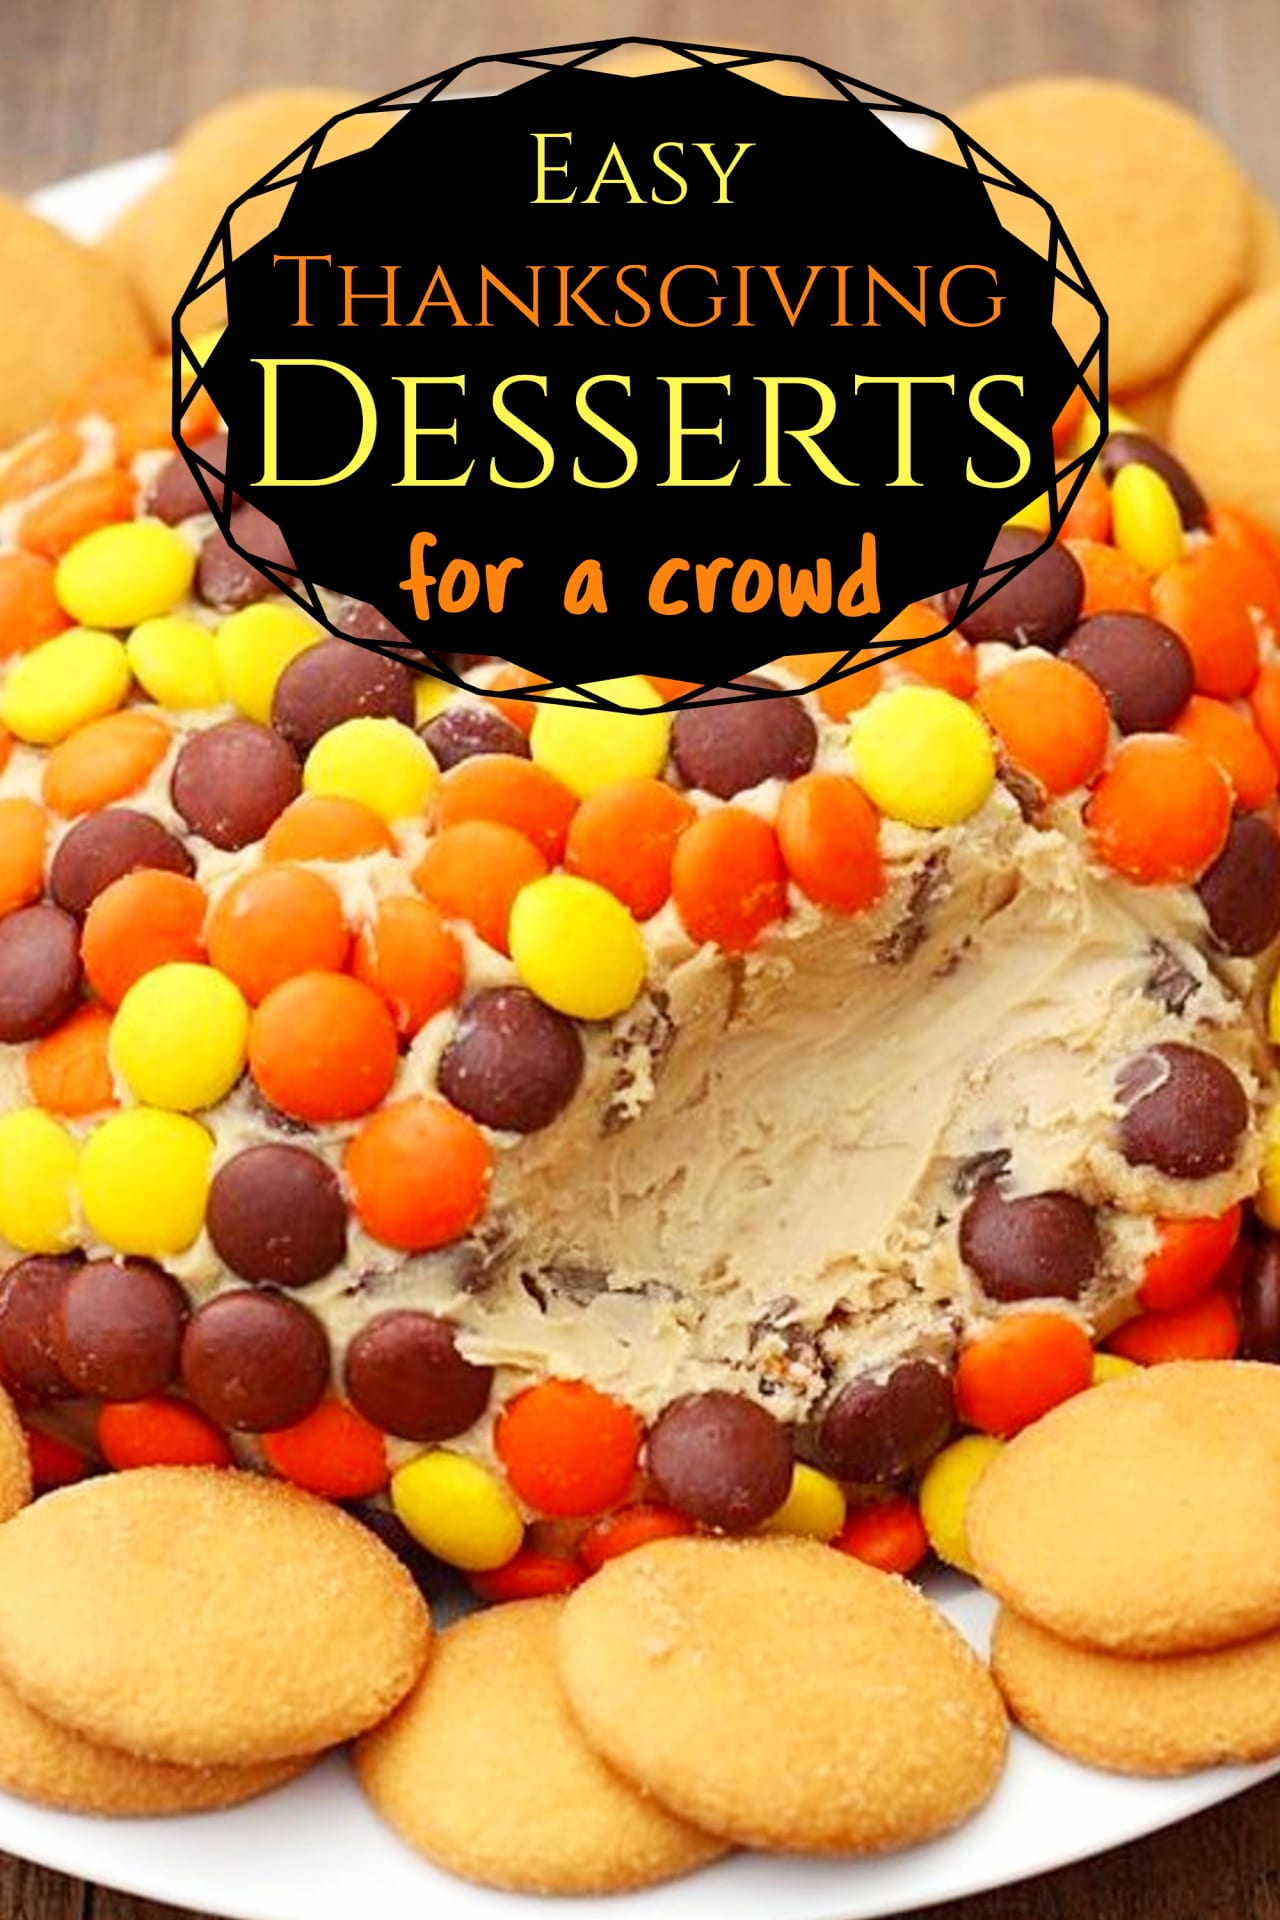 Easy Thanksgiving Desserts For a Crwod - Simple and UNIQUE Thanksgiving Desserts Recipes for your large group or family get-together or pot luck